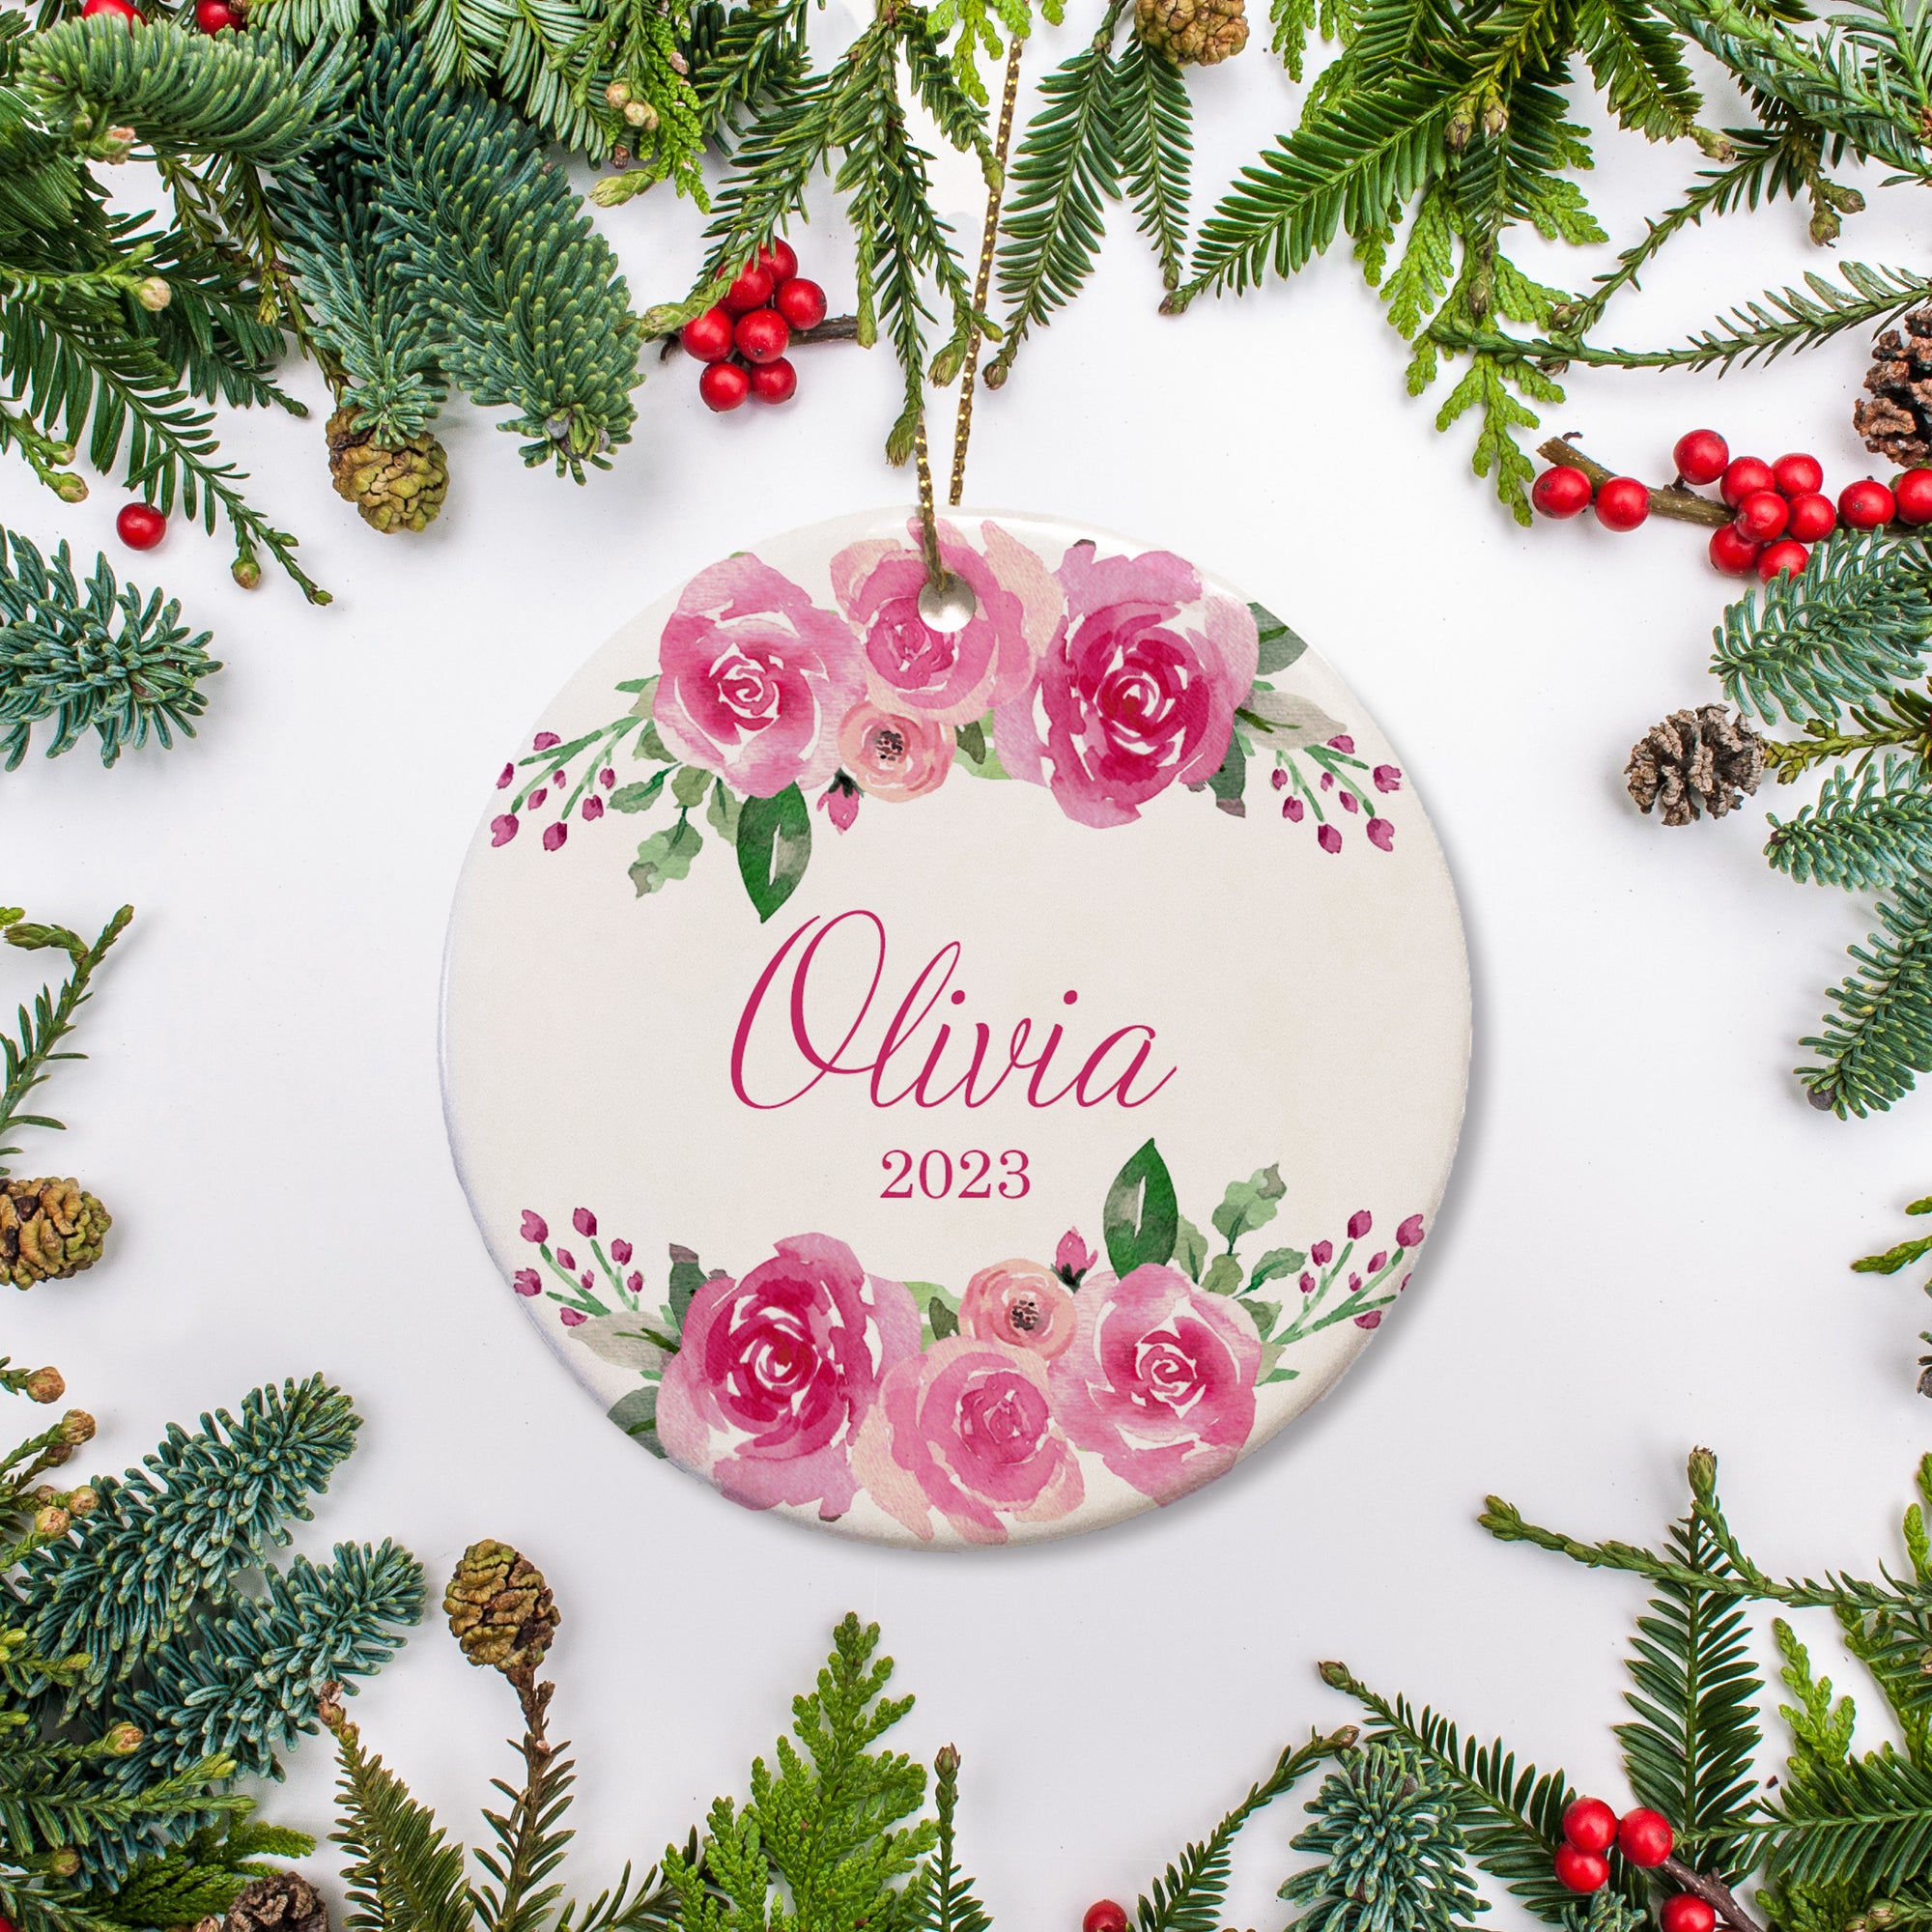 Red roses personalized Christmas ornament with name and year | Pipsy.com